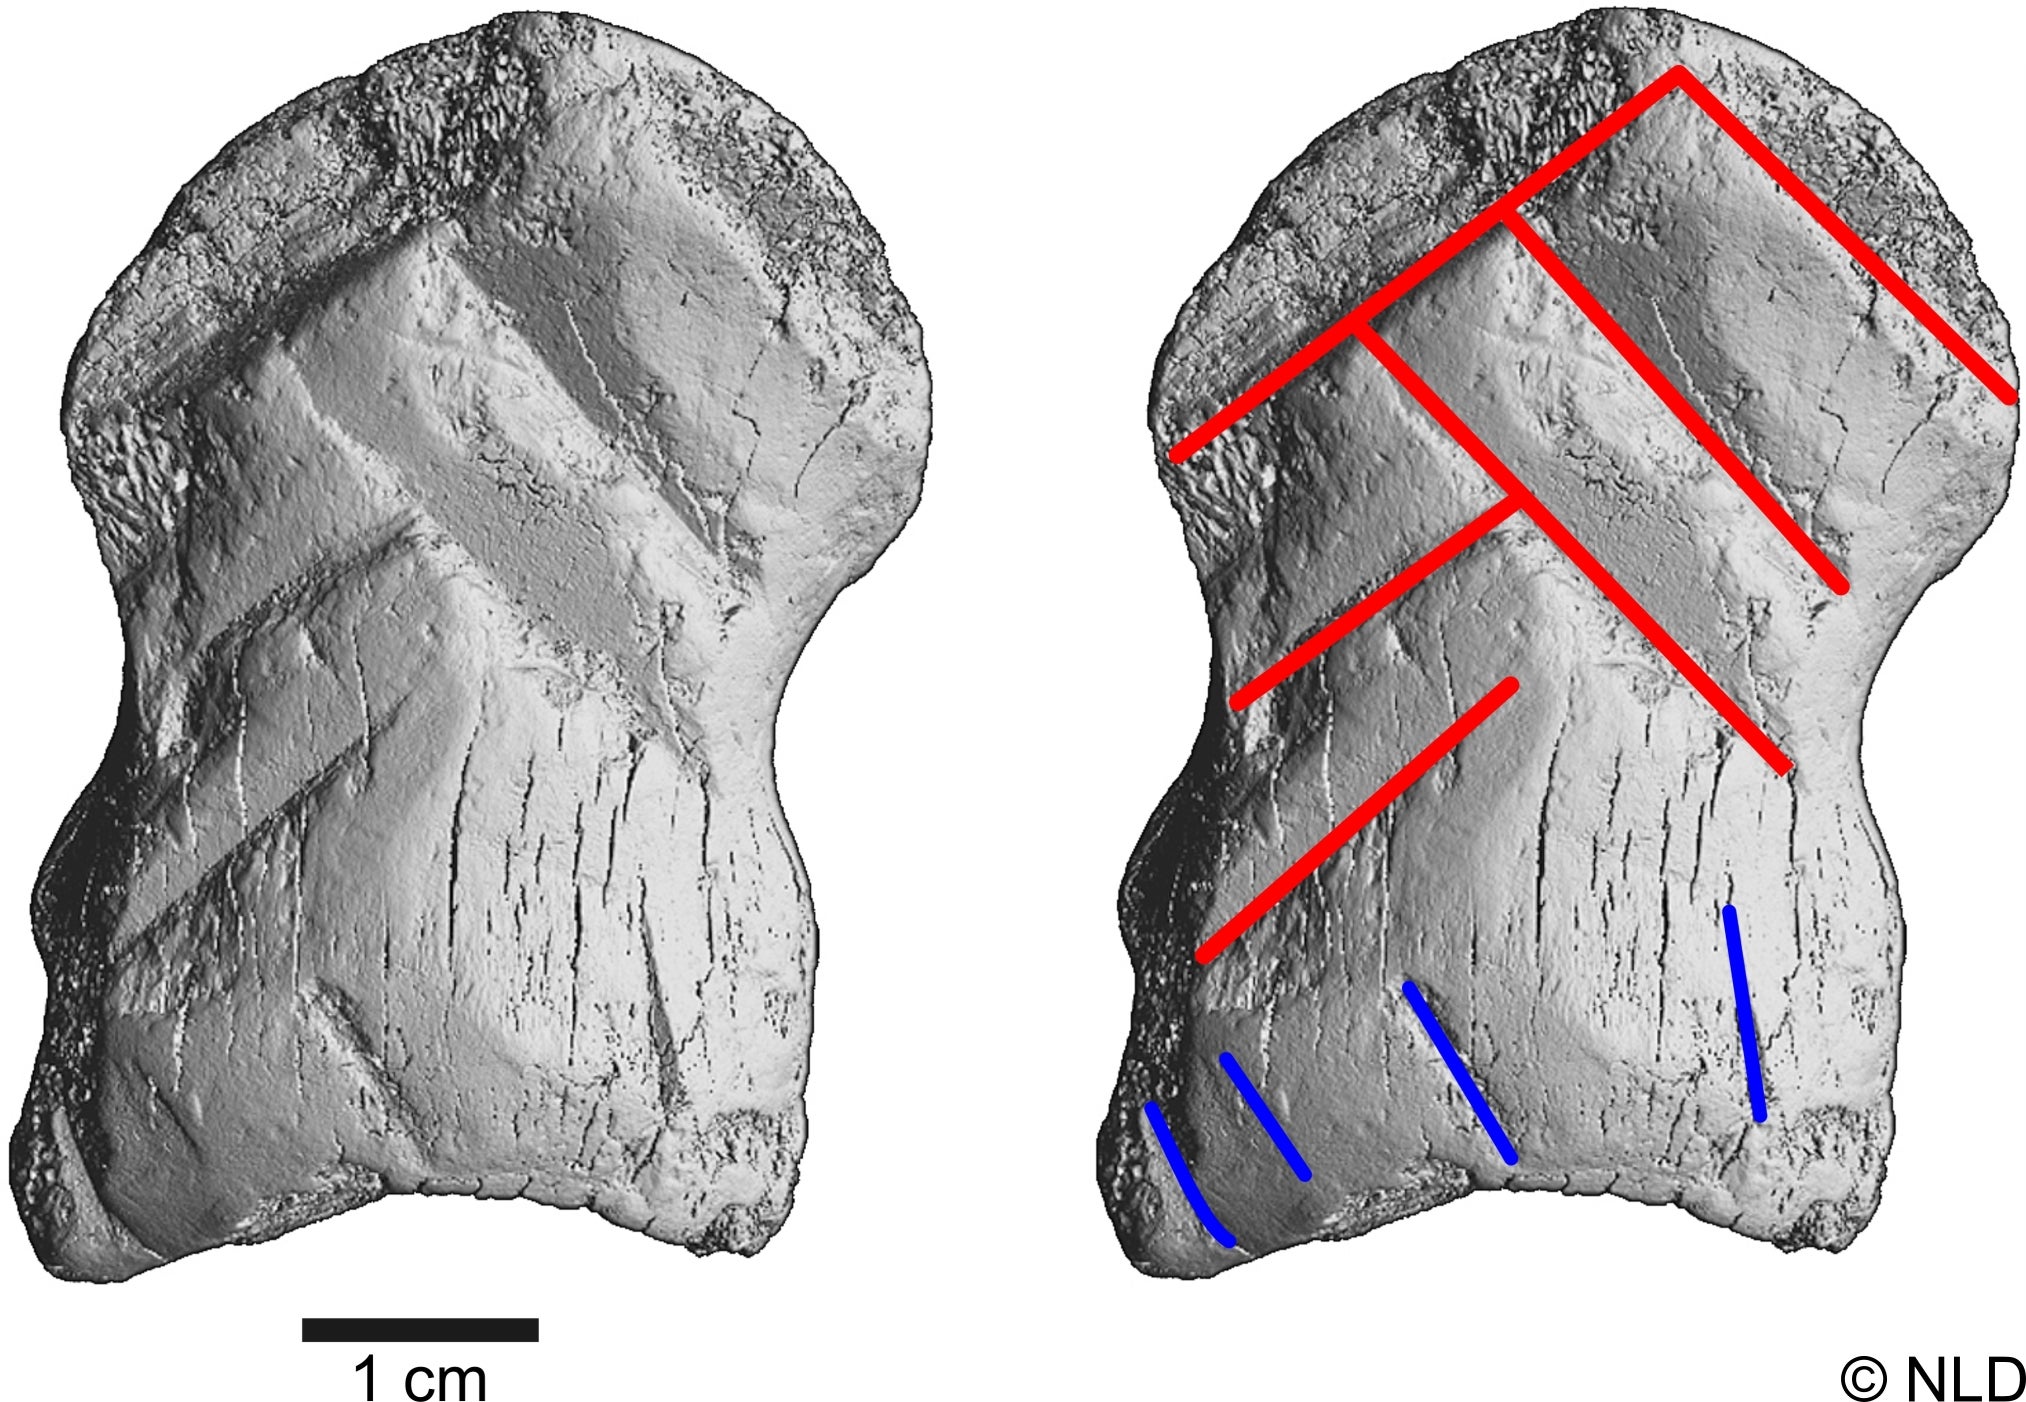 Greyscale images made from micro-CT scans of the relic. A total of 10 etchings were found on the bone, six of which (shown in red) were used to create the chevron pattern. (Image: NLD)